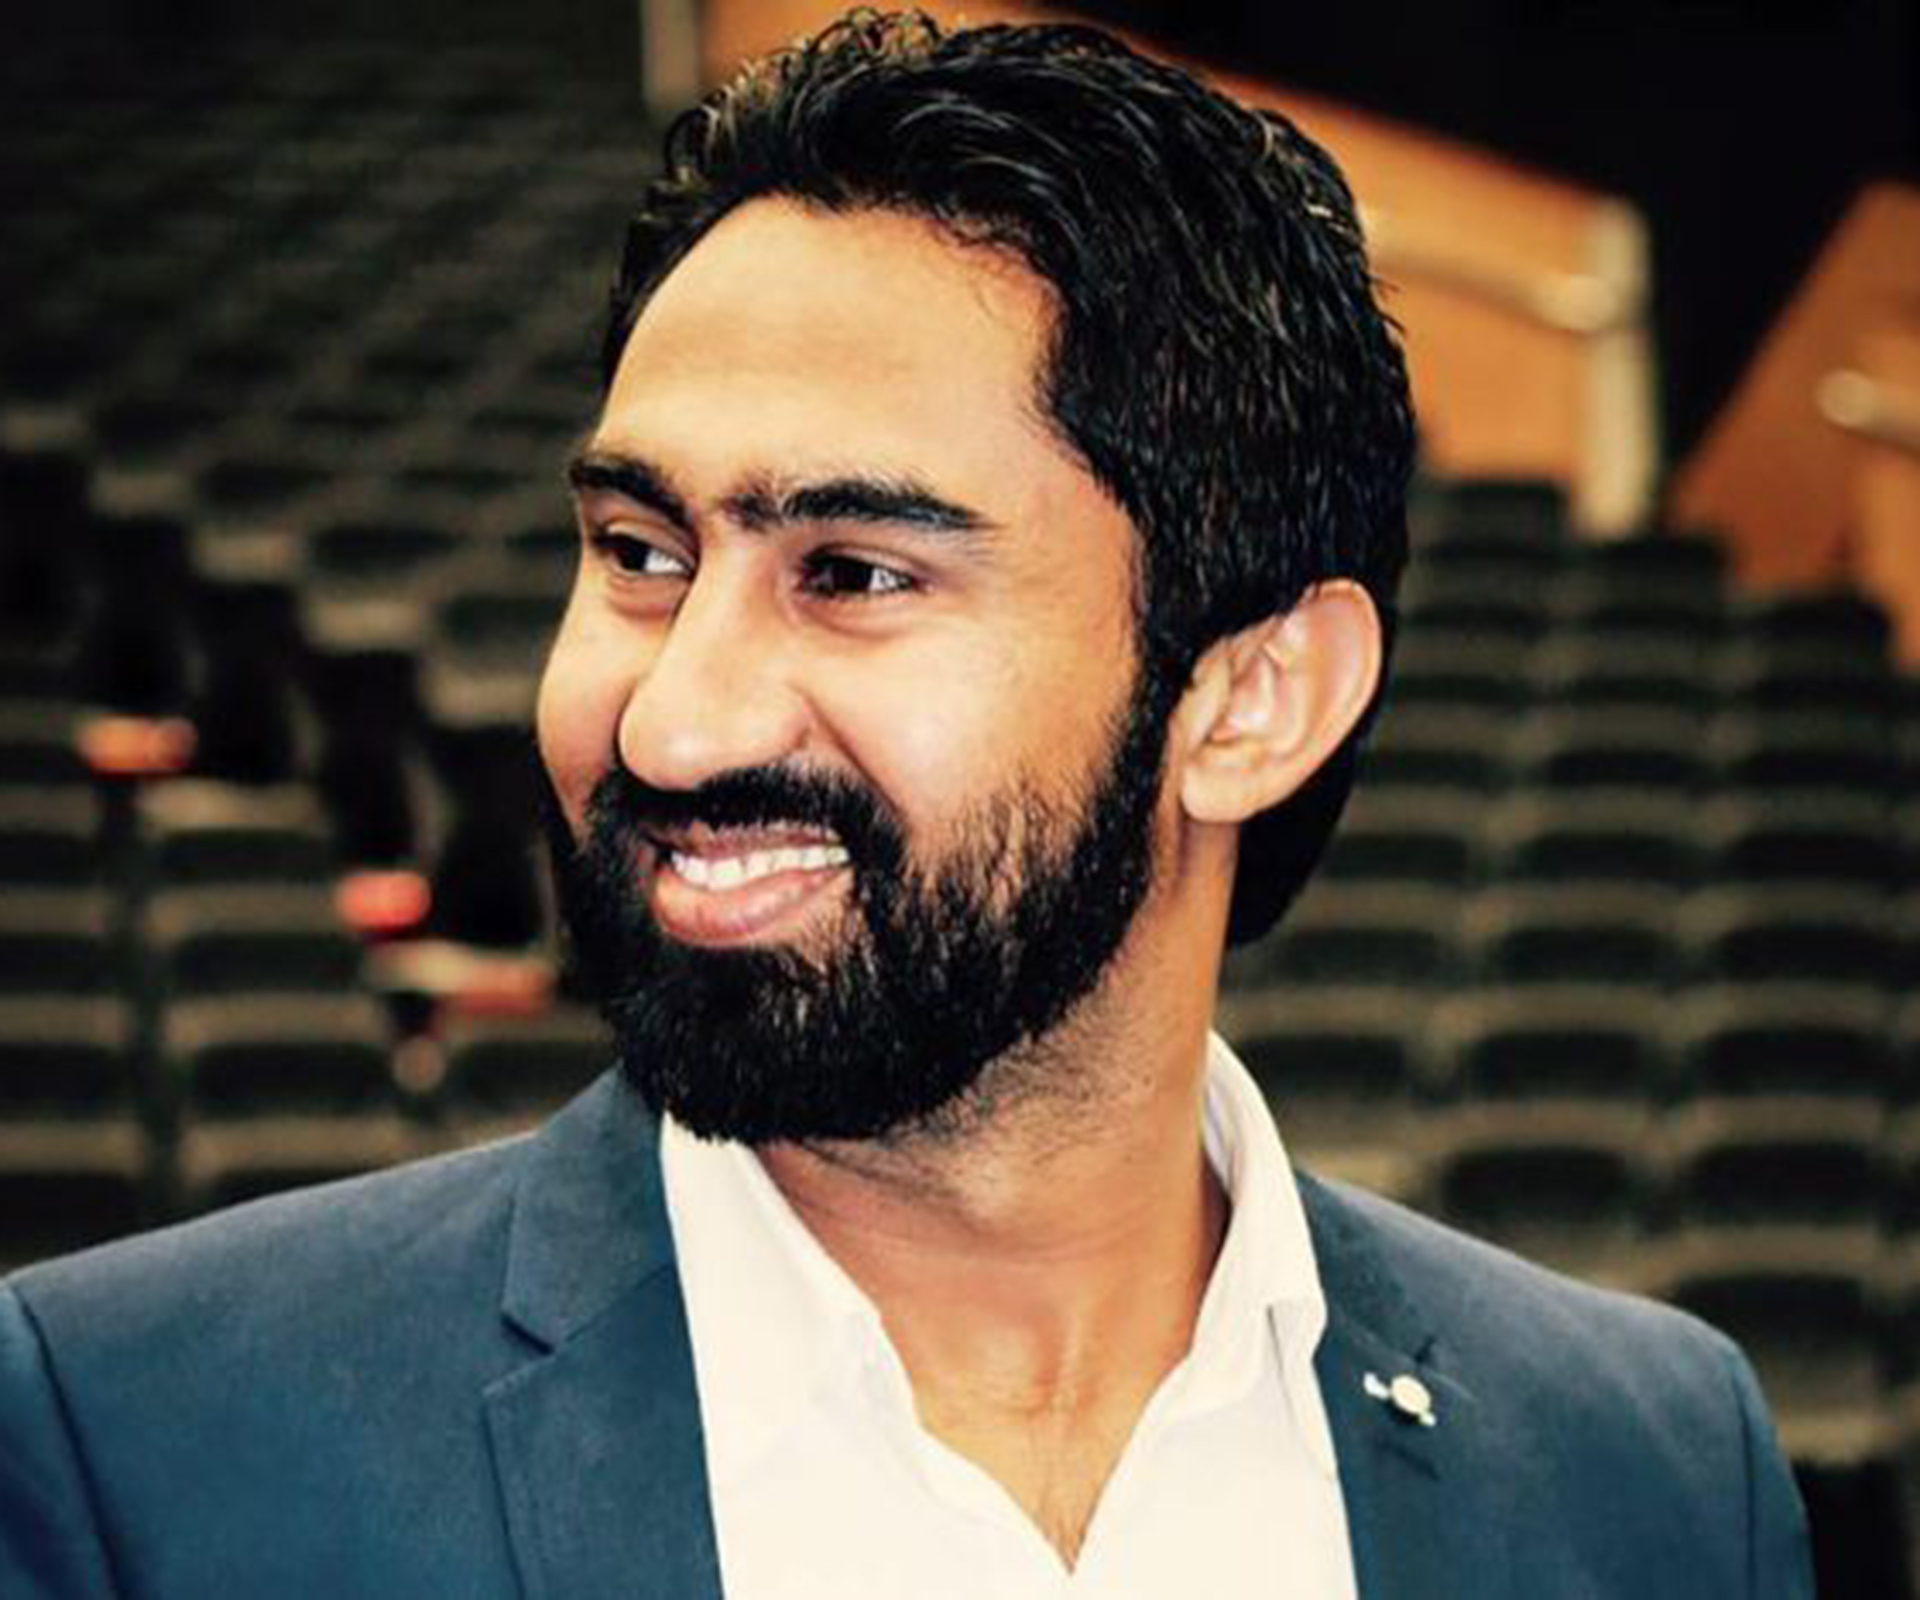 Frail parents of murdered Brisbane bus driver Manmeet Alisher haven’t been told he’s dead